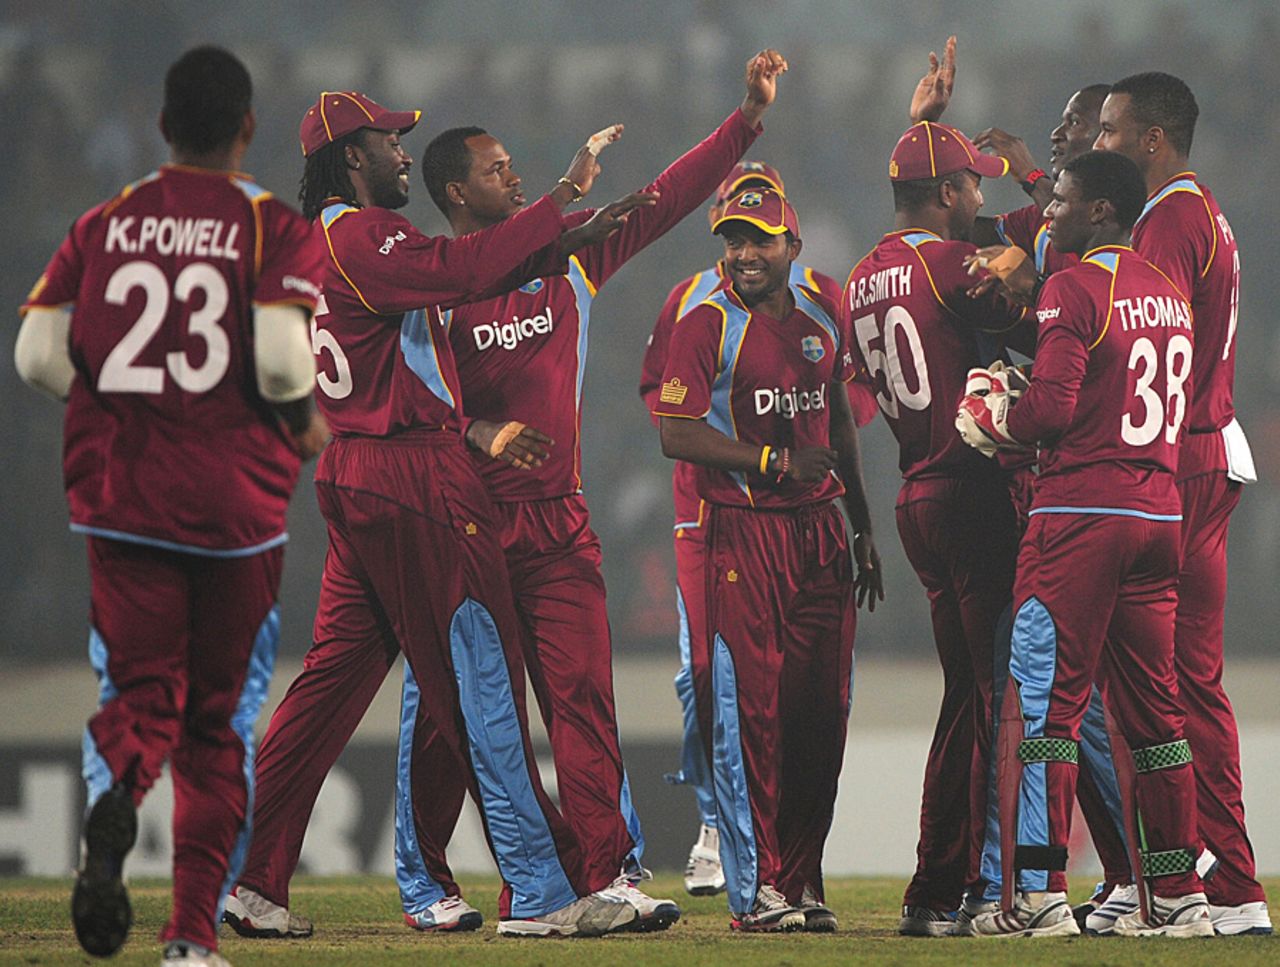 West Indies had reduced Bangladesh to 13 for 5 in the sixth over, Bangladesh v West Indies, 4th ODI, Mirpur, December 7, 2012